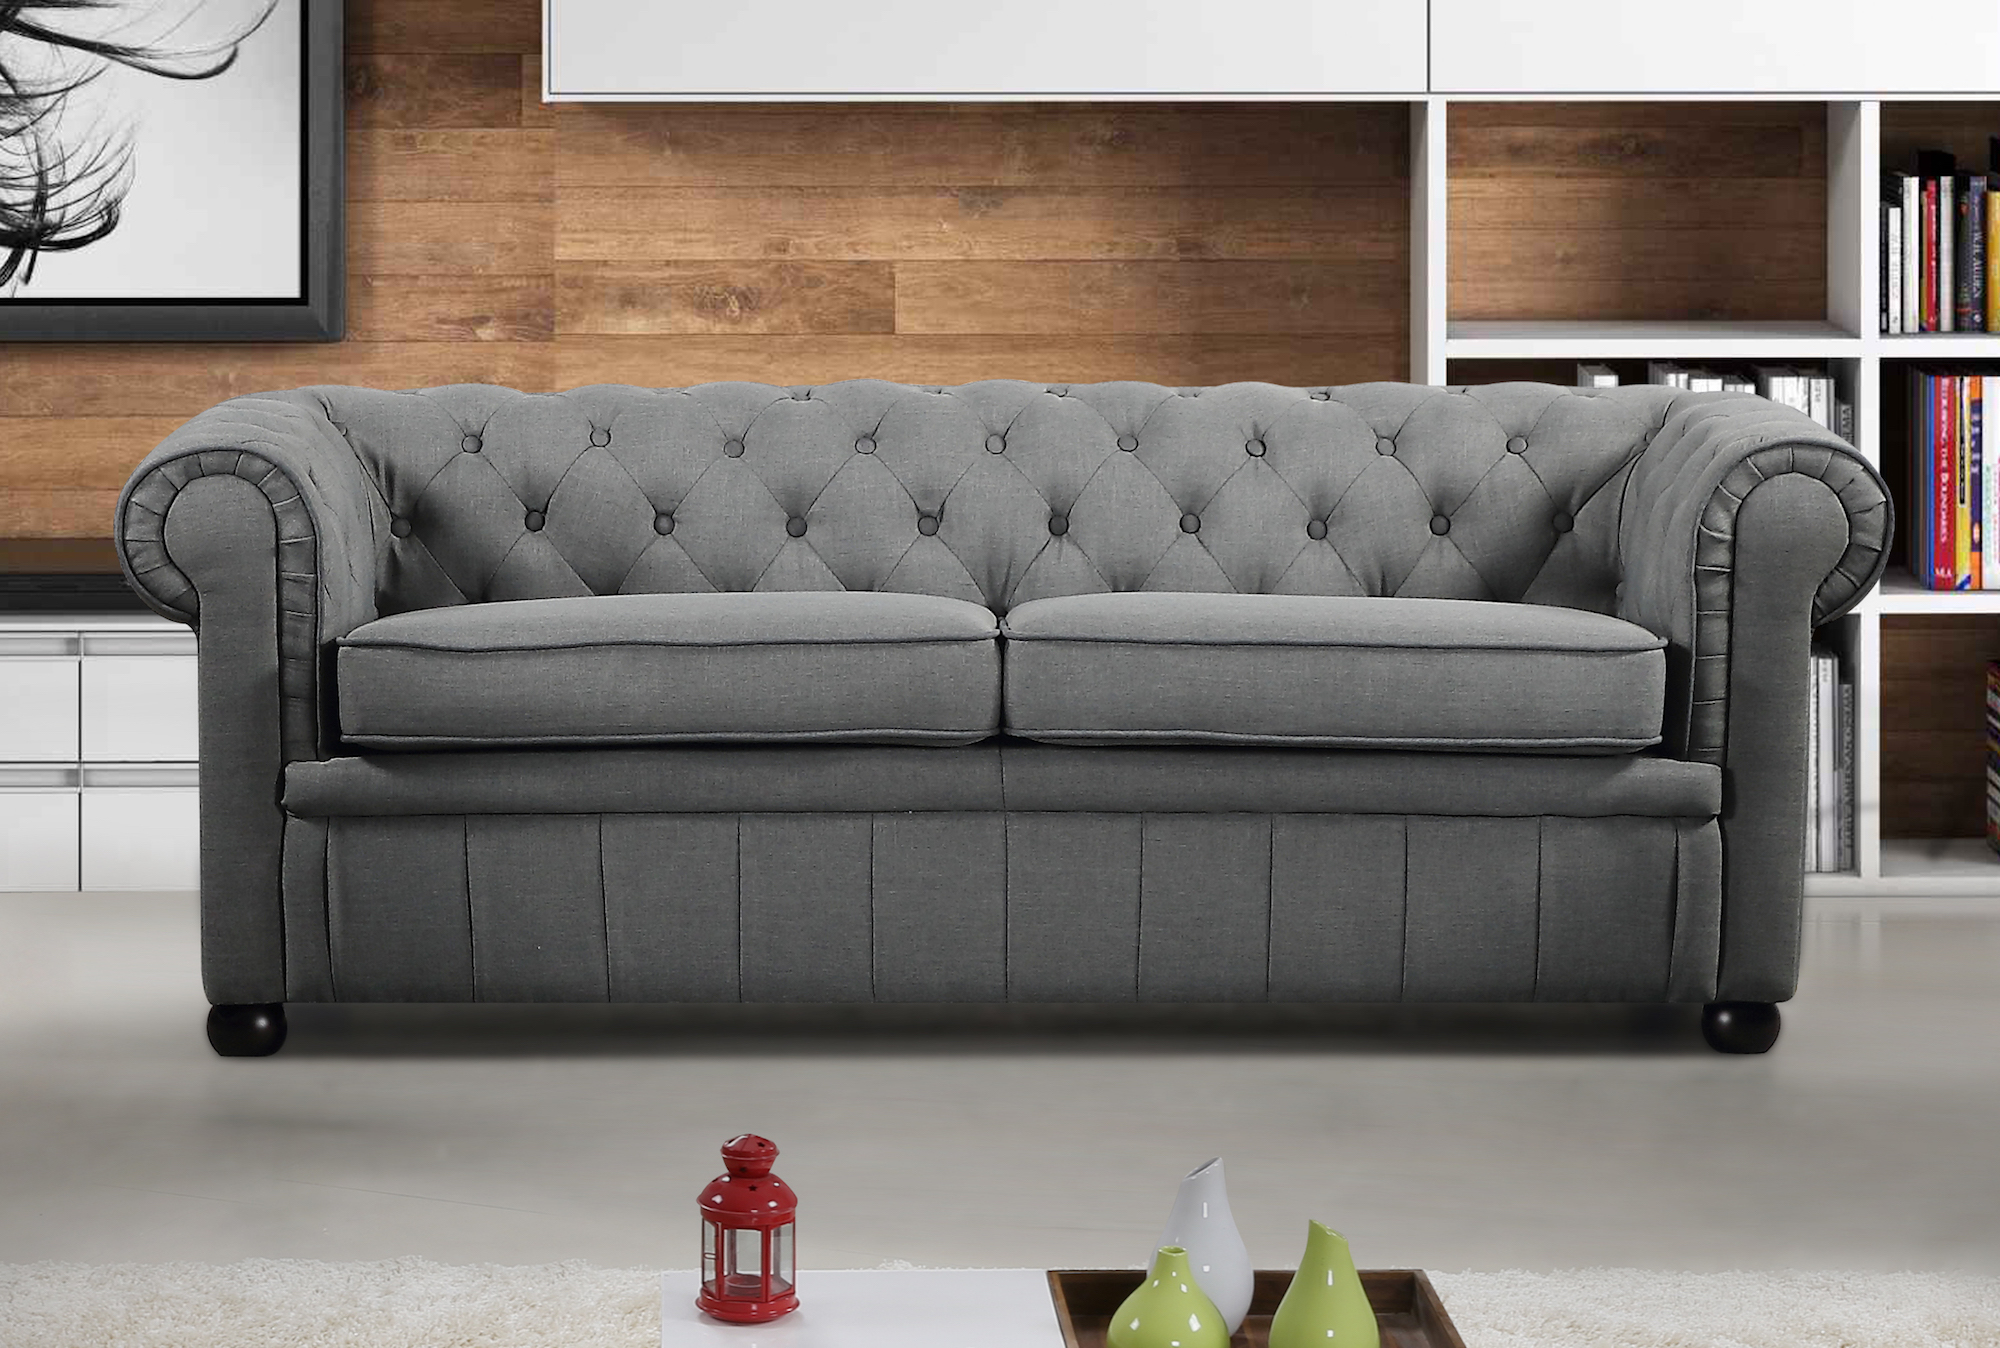 grey chesterfield style sofa bed